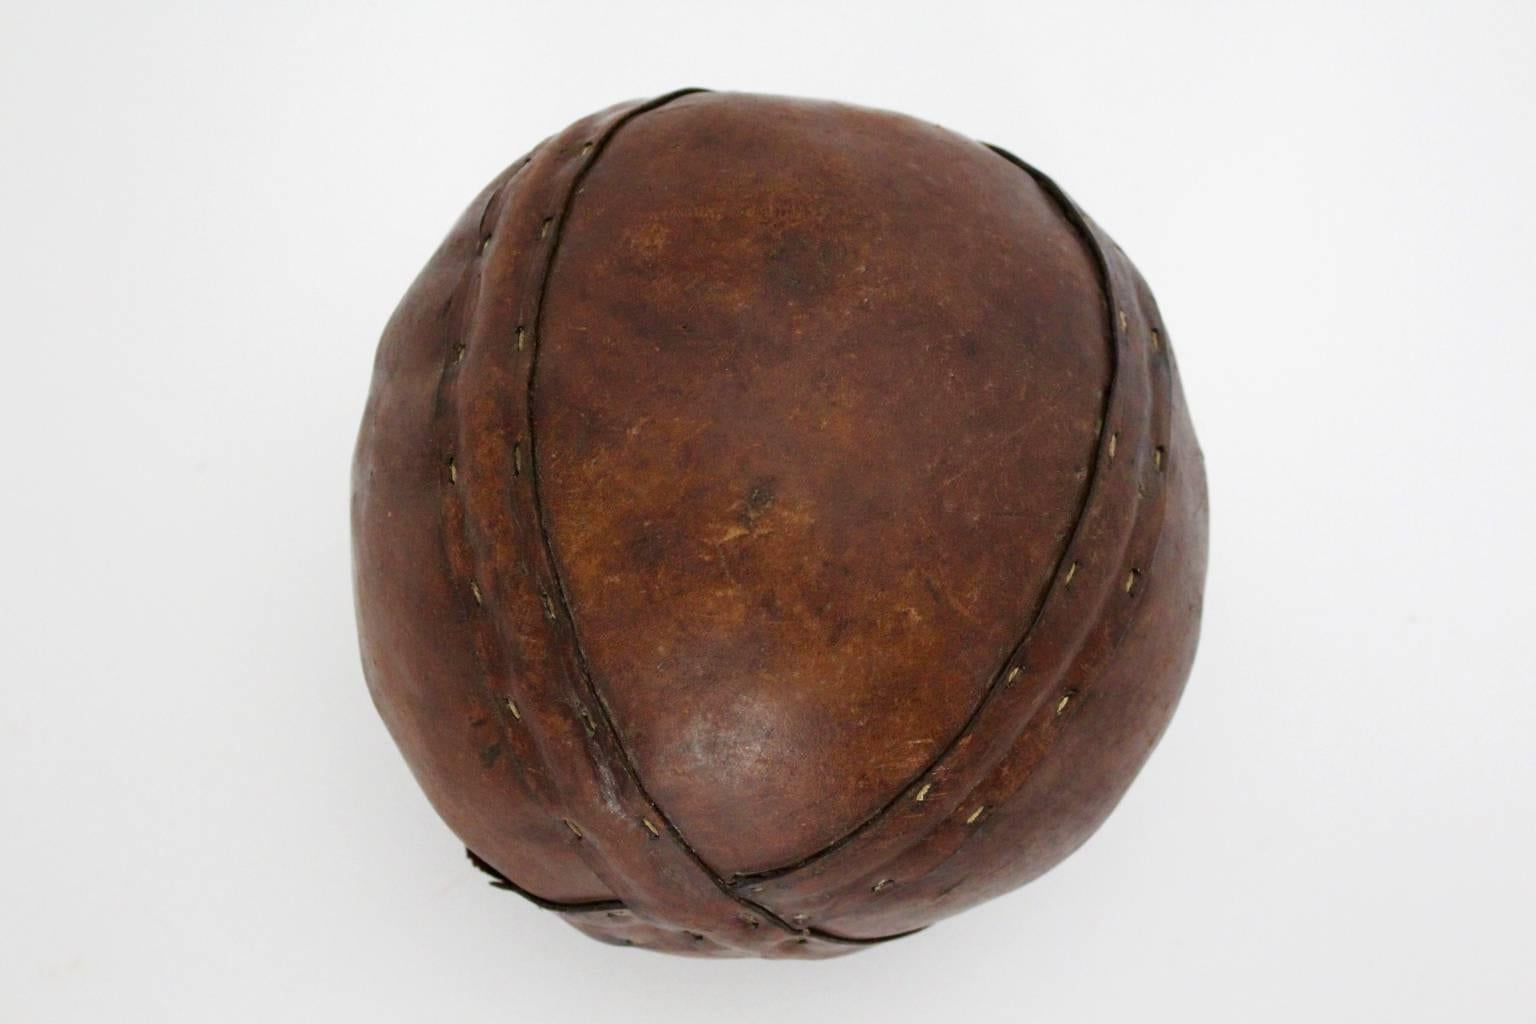 Art Deco vintage ball from stitched leather, 1920s with beautiful details like stitched leather parts and a beautiful leather patina.

The original condition of the leather punchball is very good with signs of age use.
 All measures are approximate.